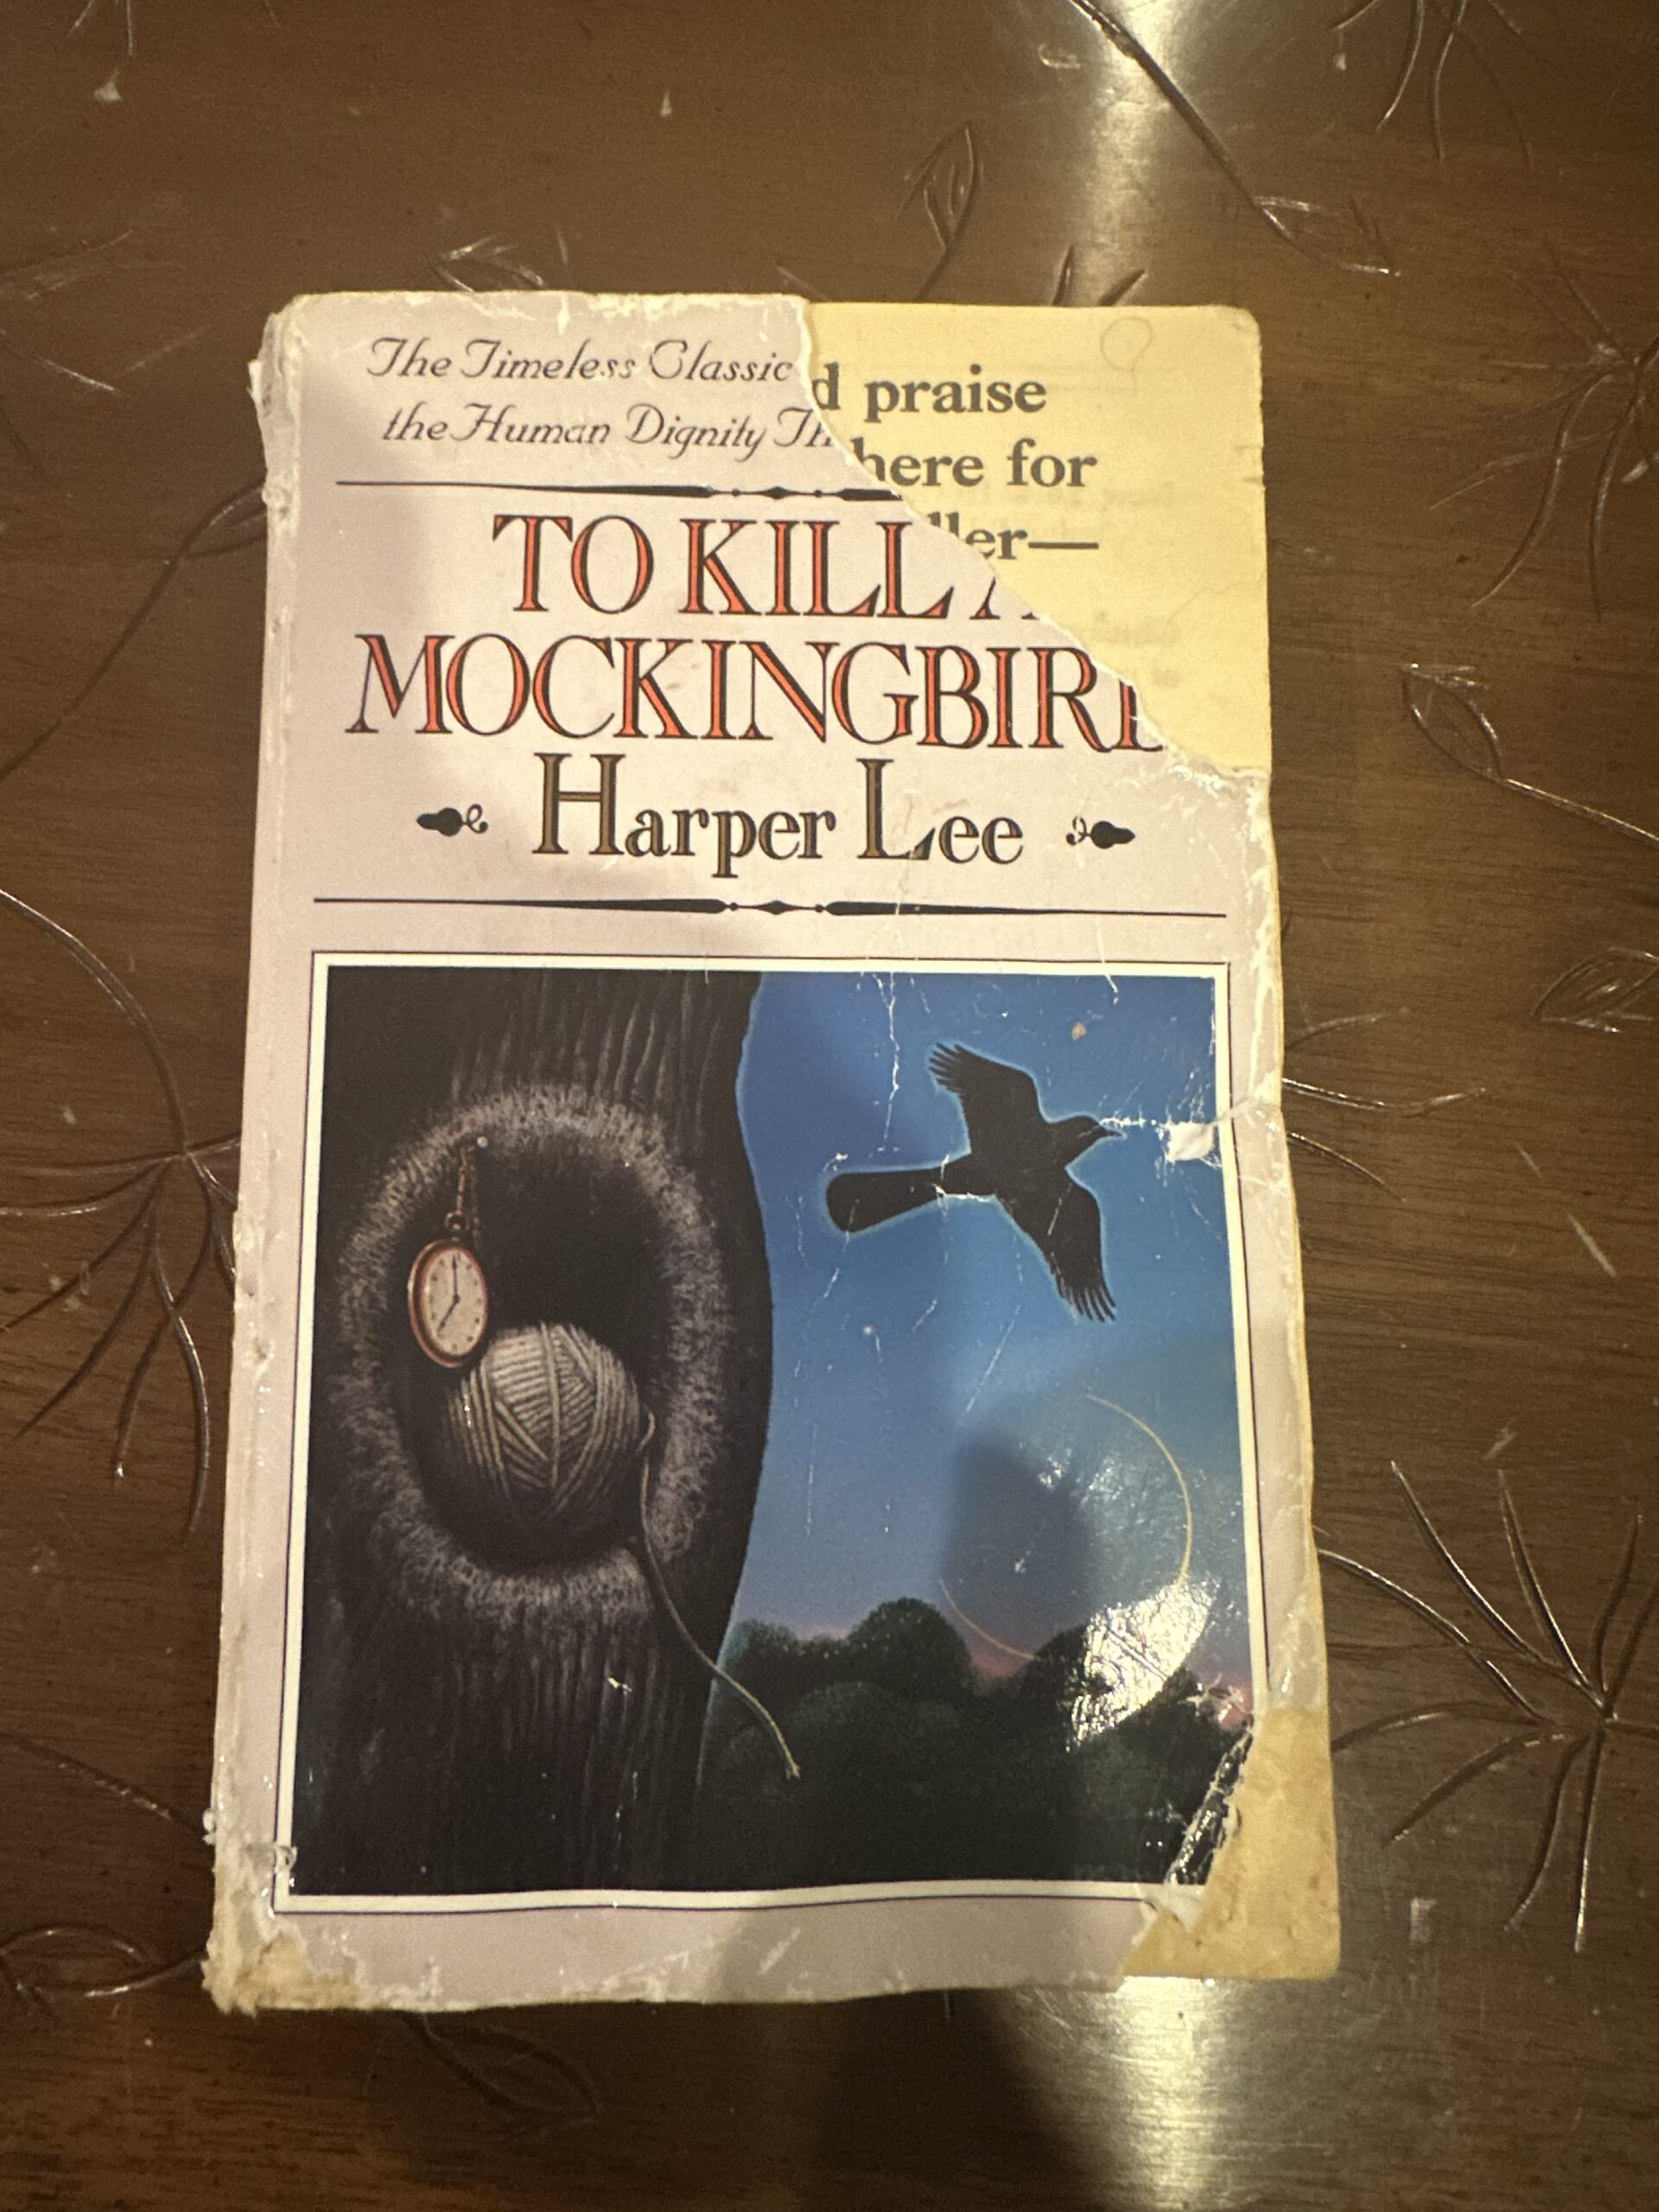 Front cover of "To Kill a Mocking Bird" it is heavily worn